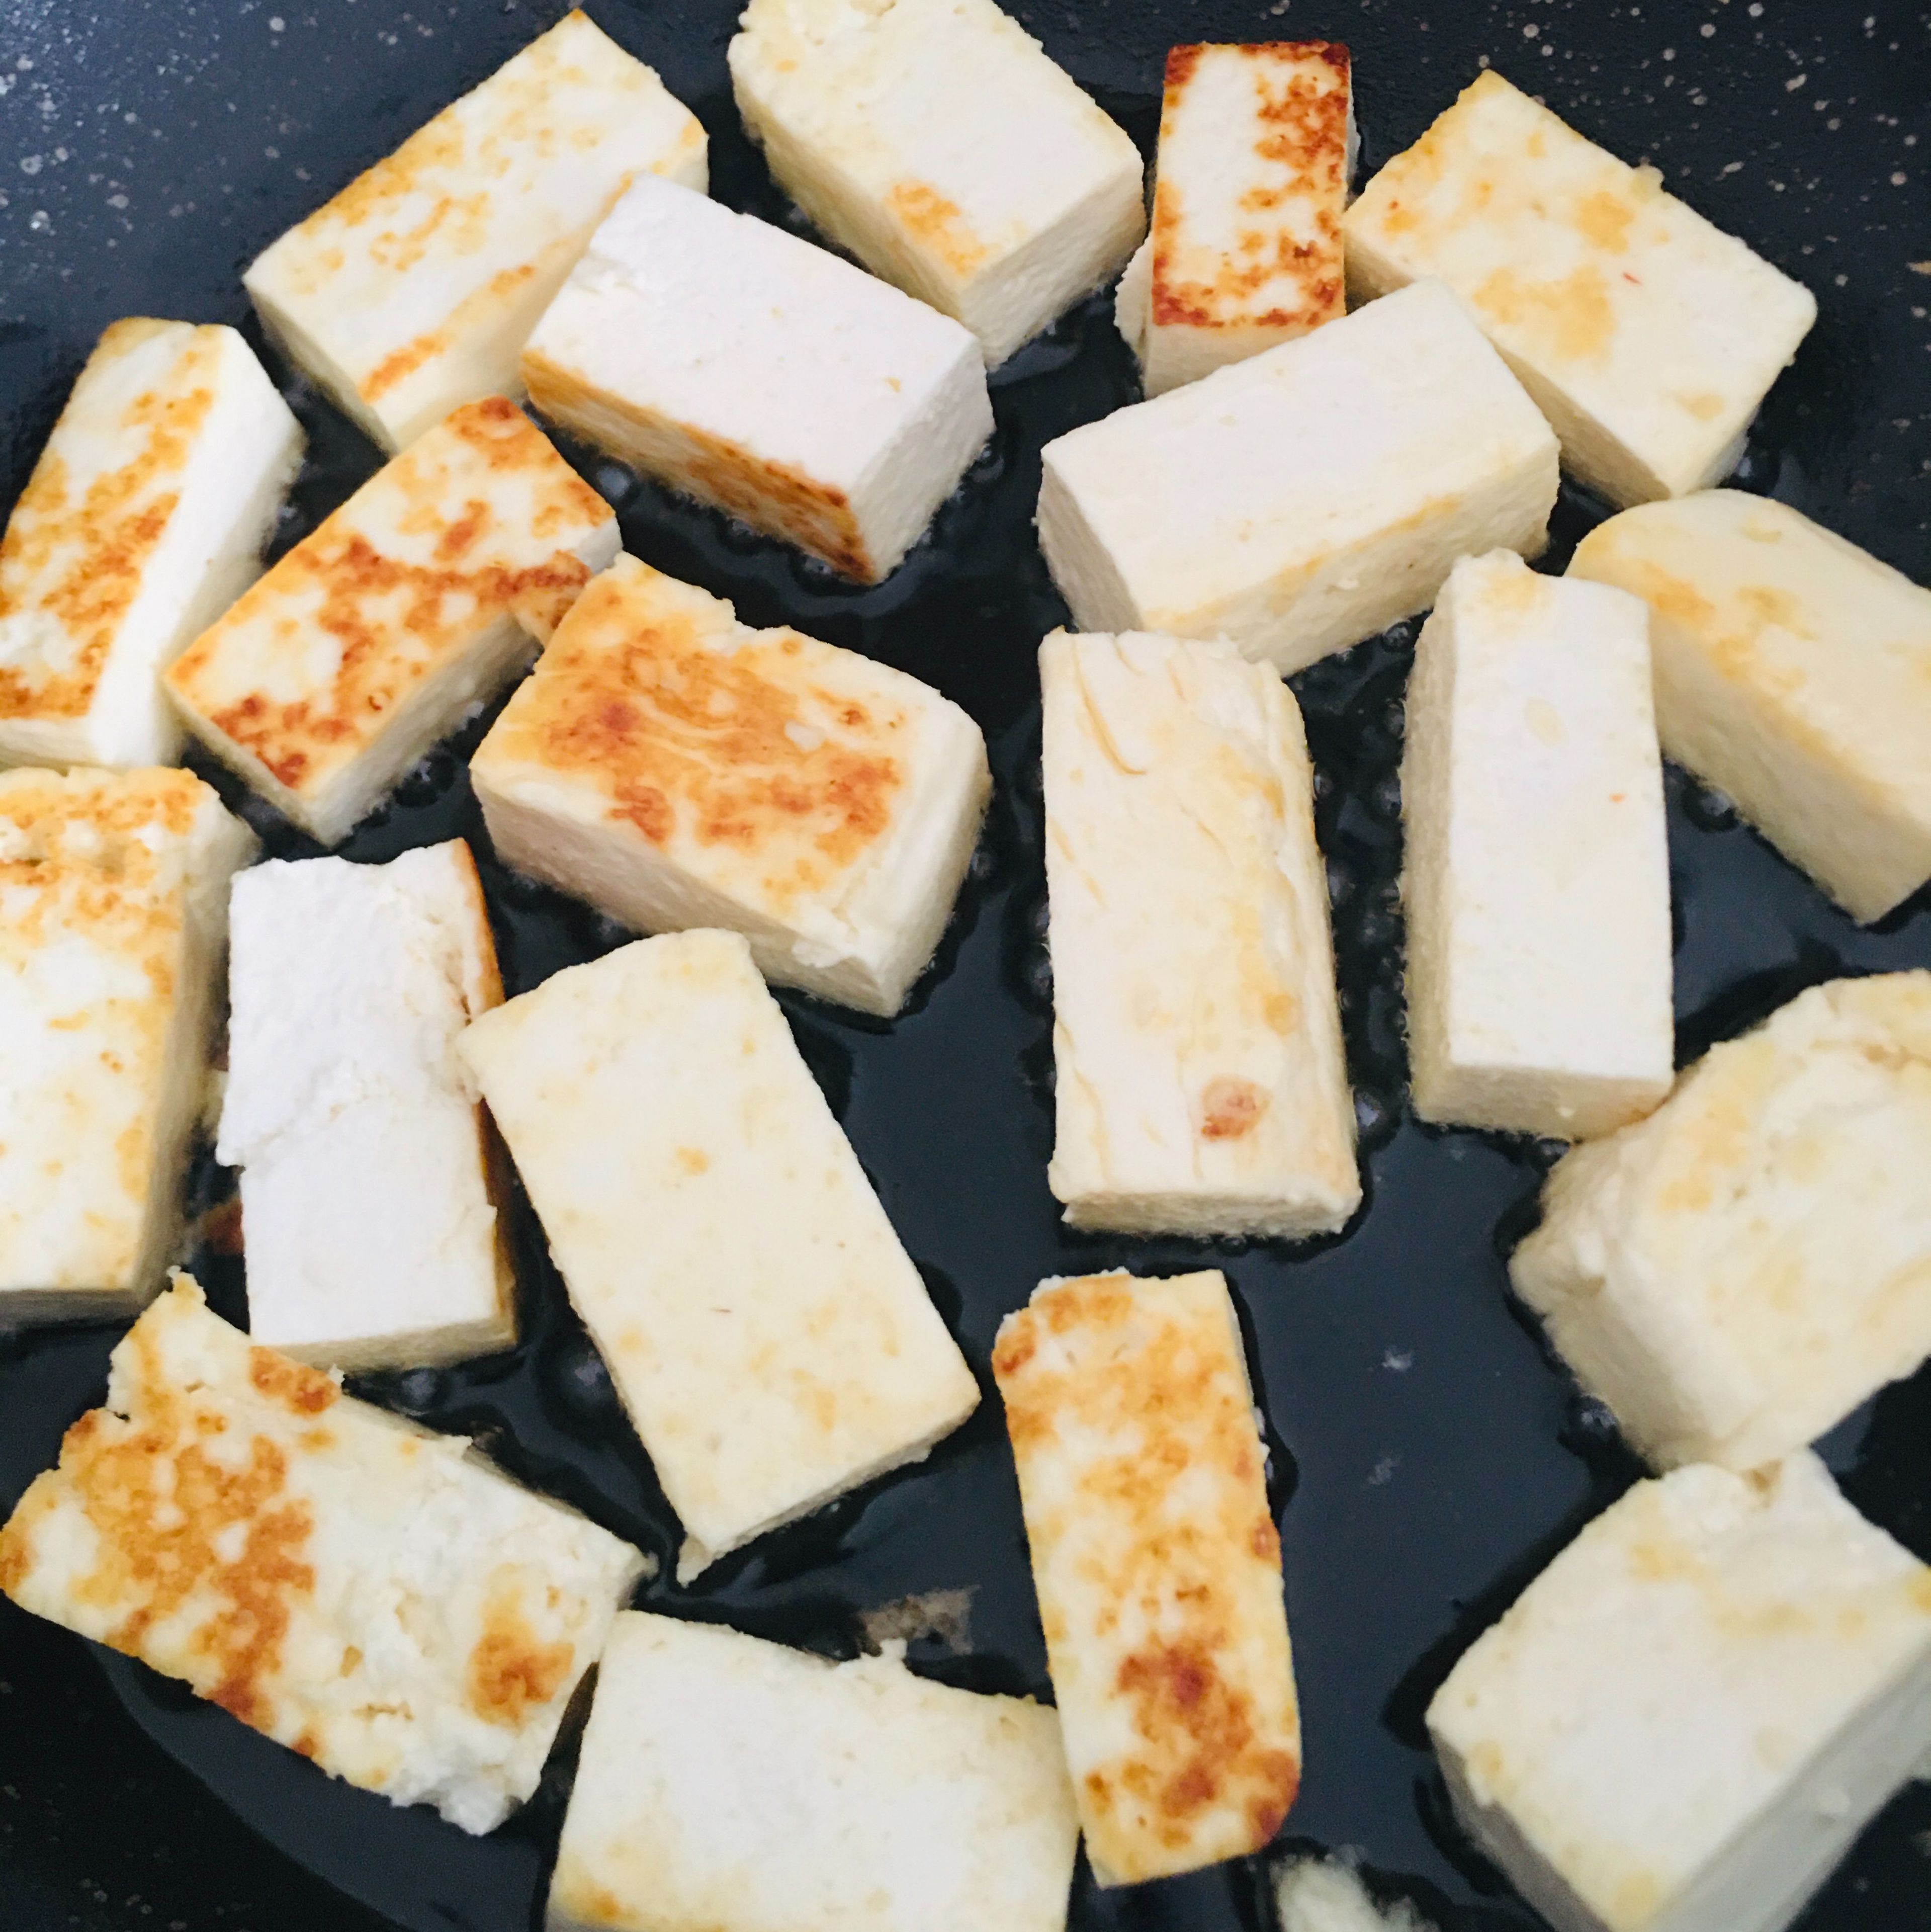 While the gravy is getting ready, go ahead and fry the indian cottage cheese (paneer) cubes. Start with by heating the second pan with a bit of oil in it. Once the oil is hot, place the paneer cubes and let it turn golden brown on one side before flipping it. It is necessary to use a non-stick pan as paneer tends to stick to the bottom. Be gentle while flipping them as they are soft and tender at this stage.